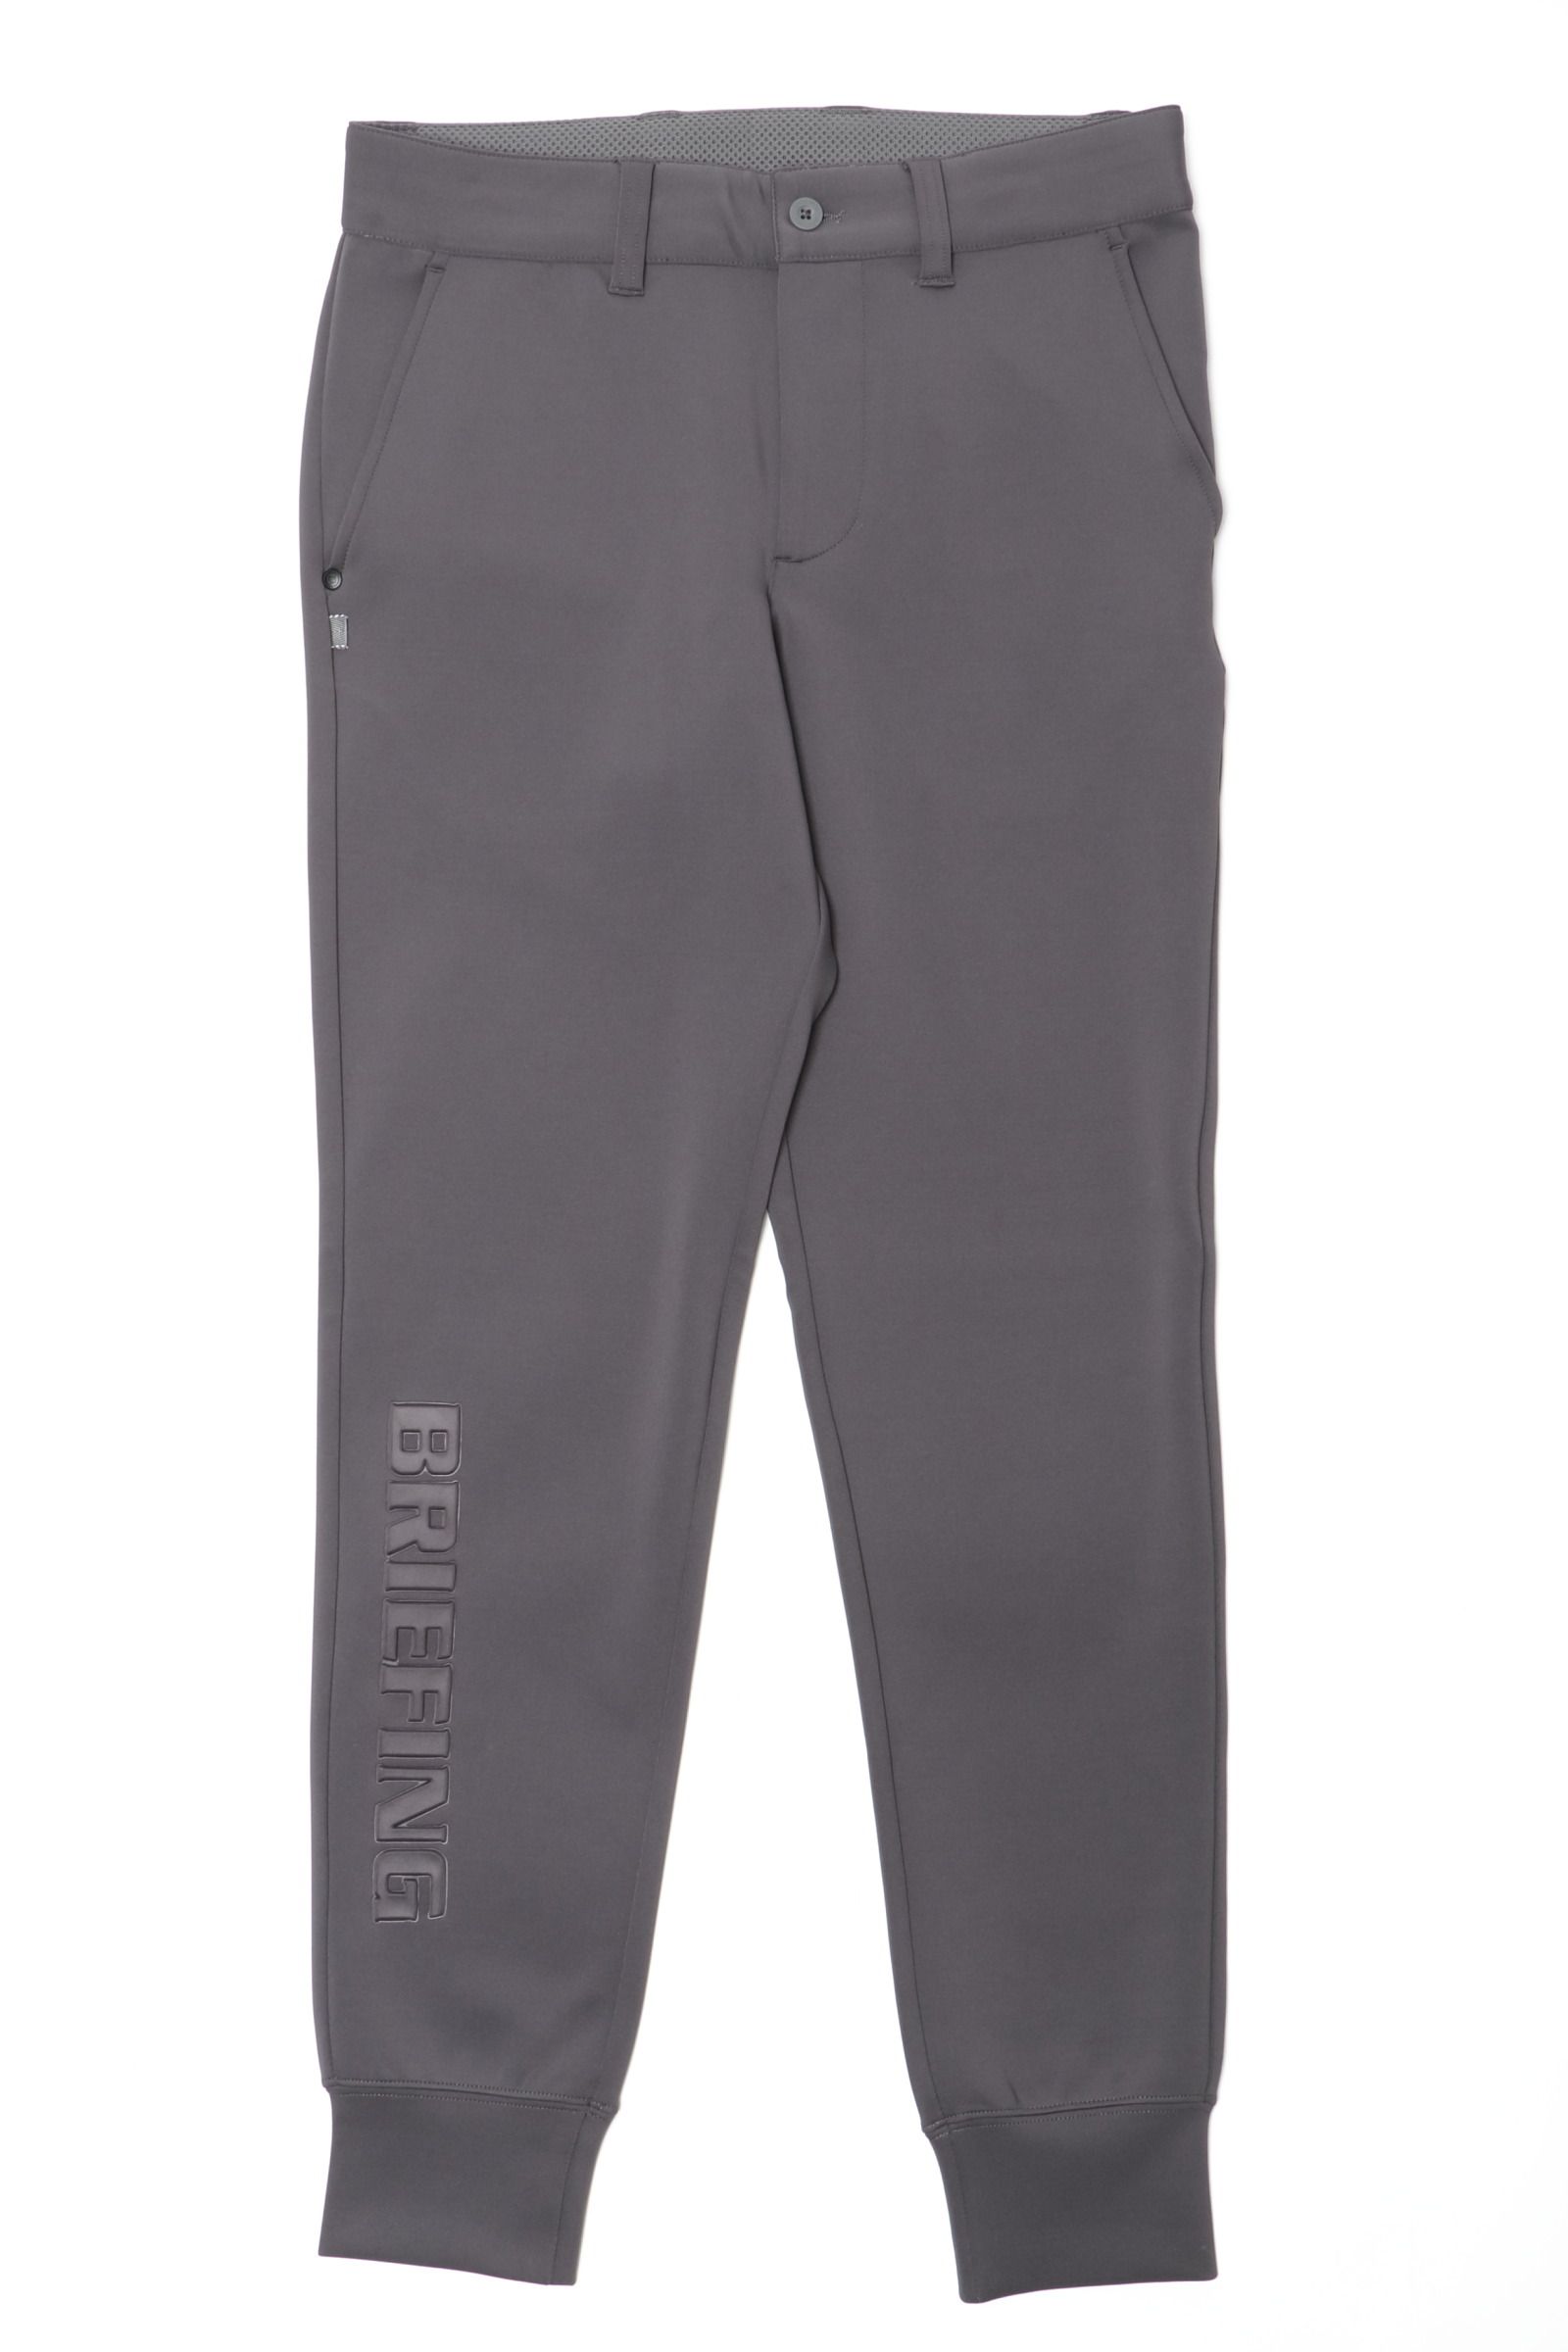 BRIEFING GOLF - 【セットアップあり】 MENS 3D LOGO JOGGER PANTS